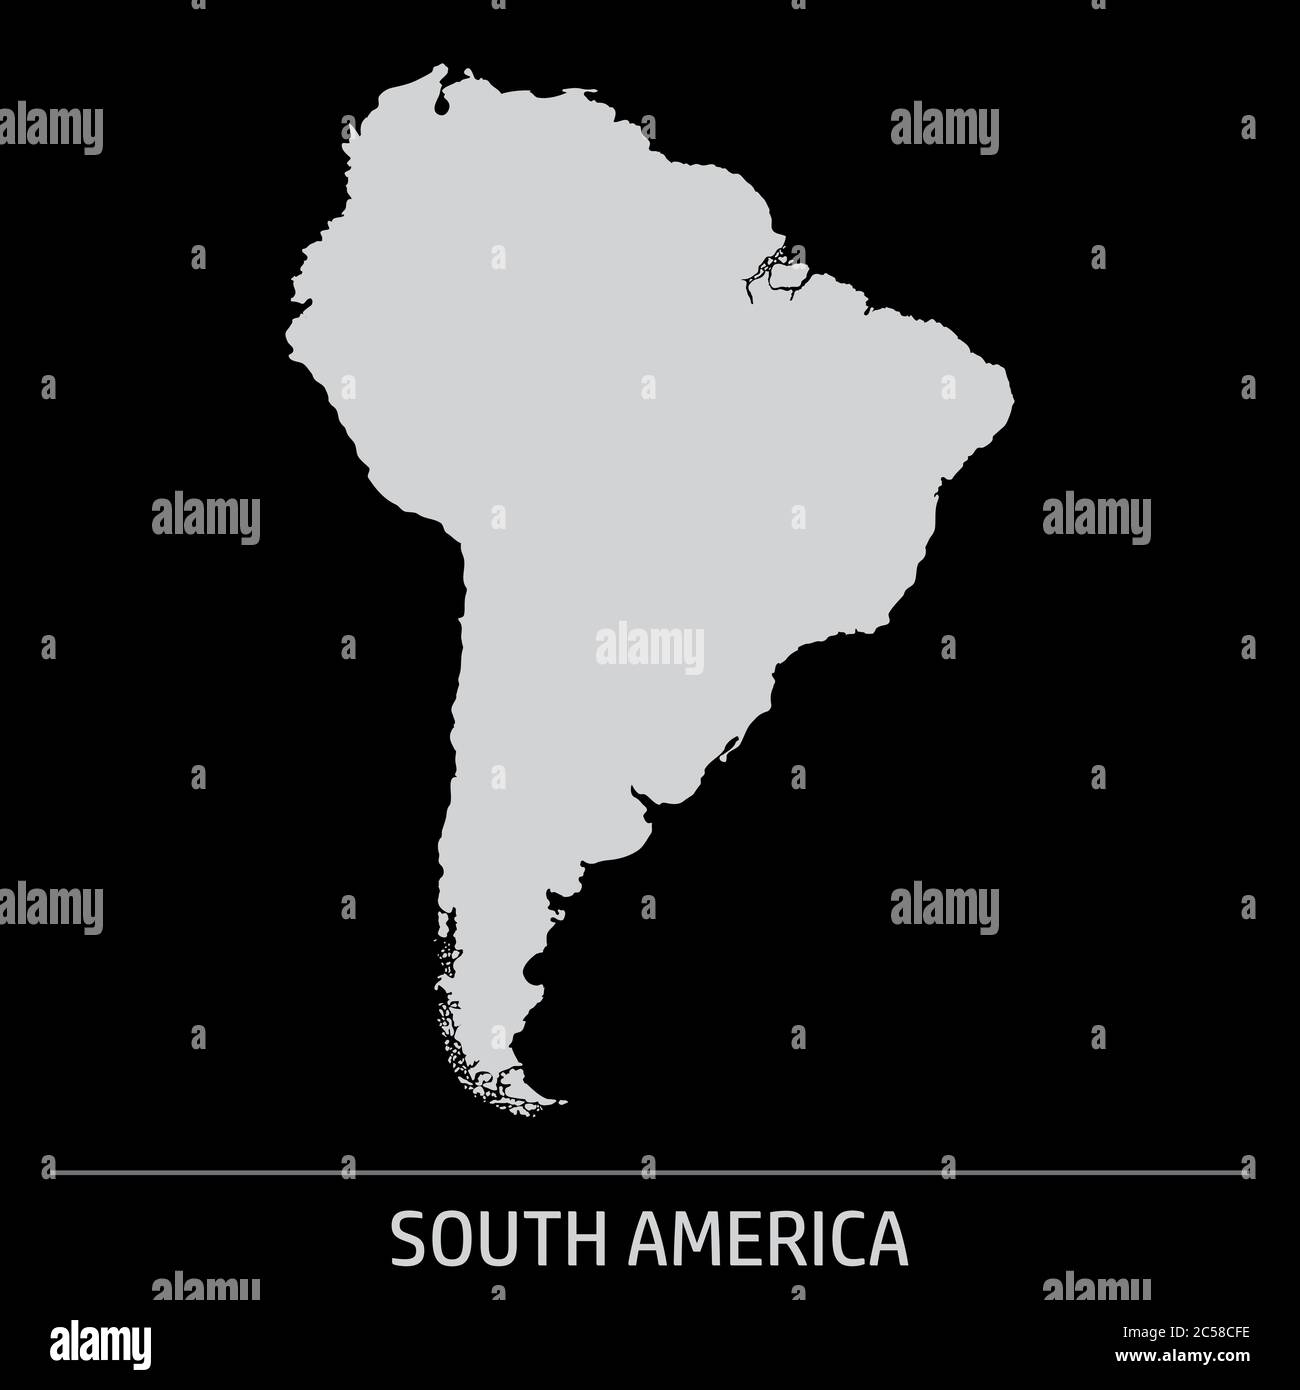 South America map icon Stock Vector